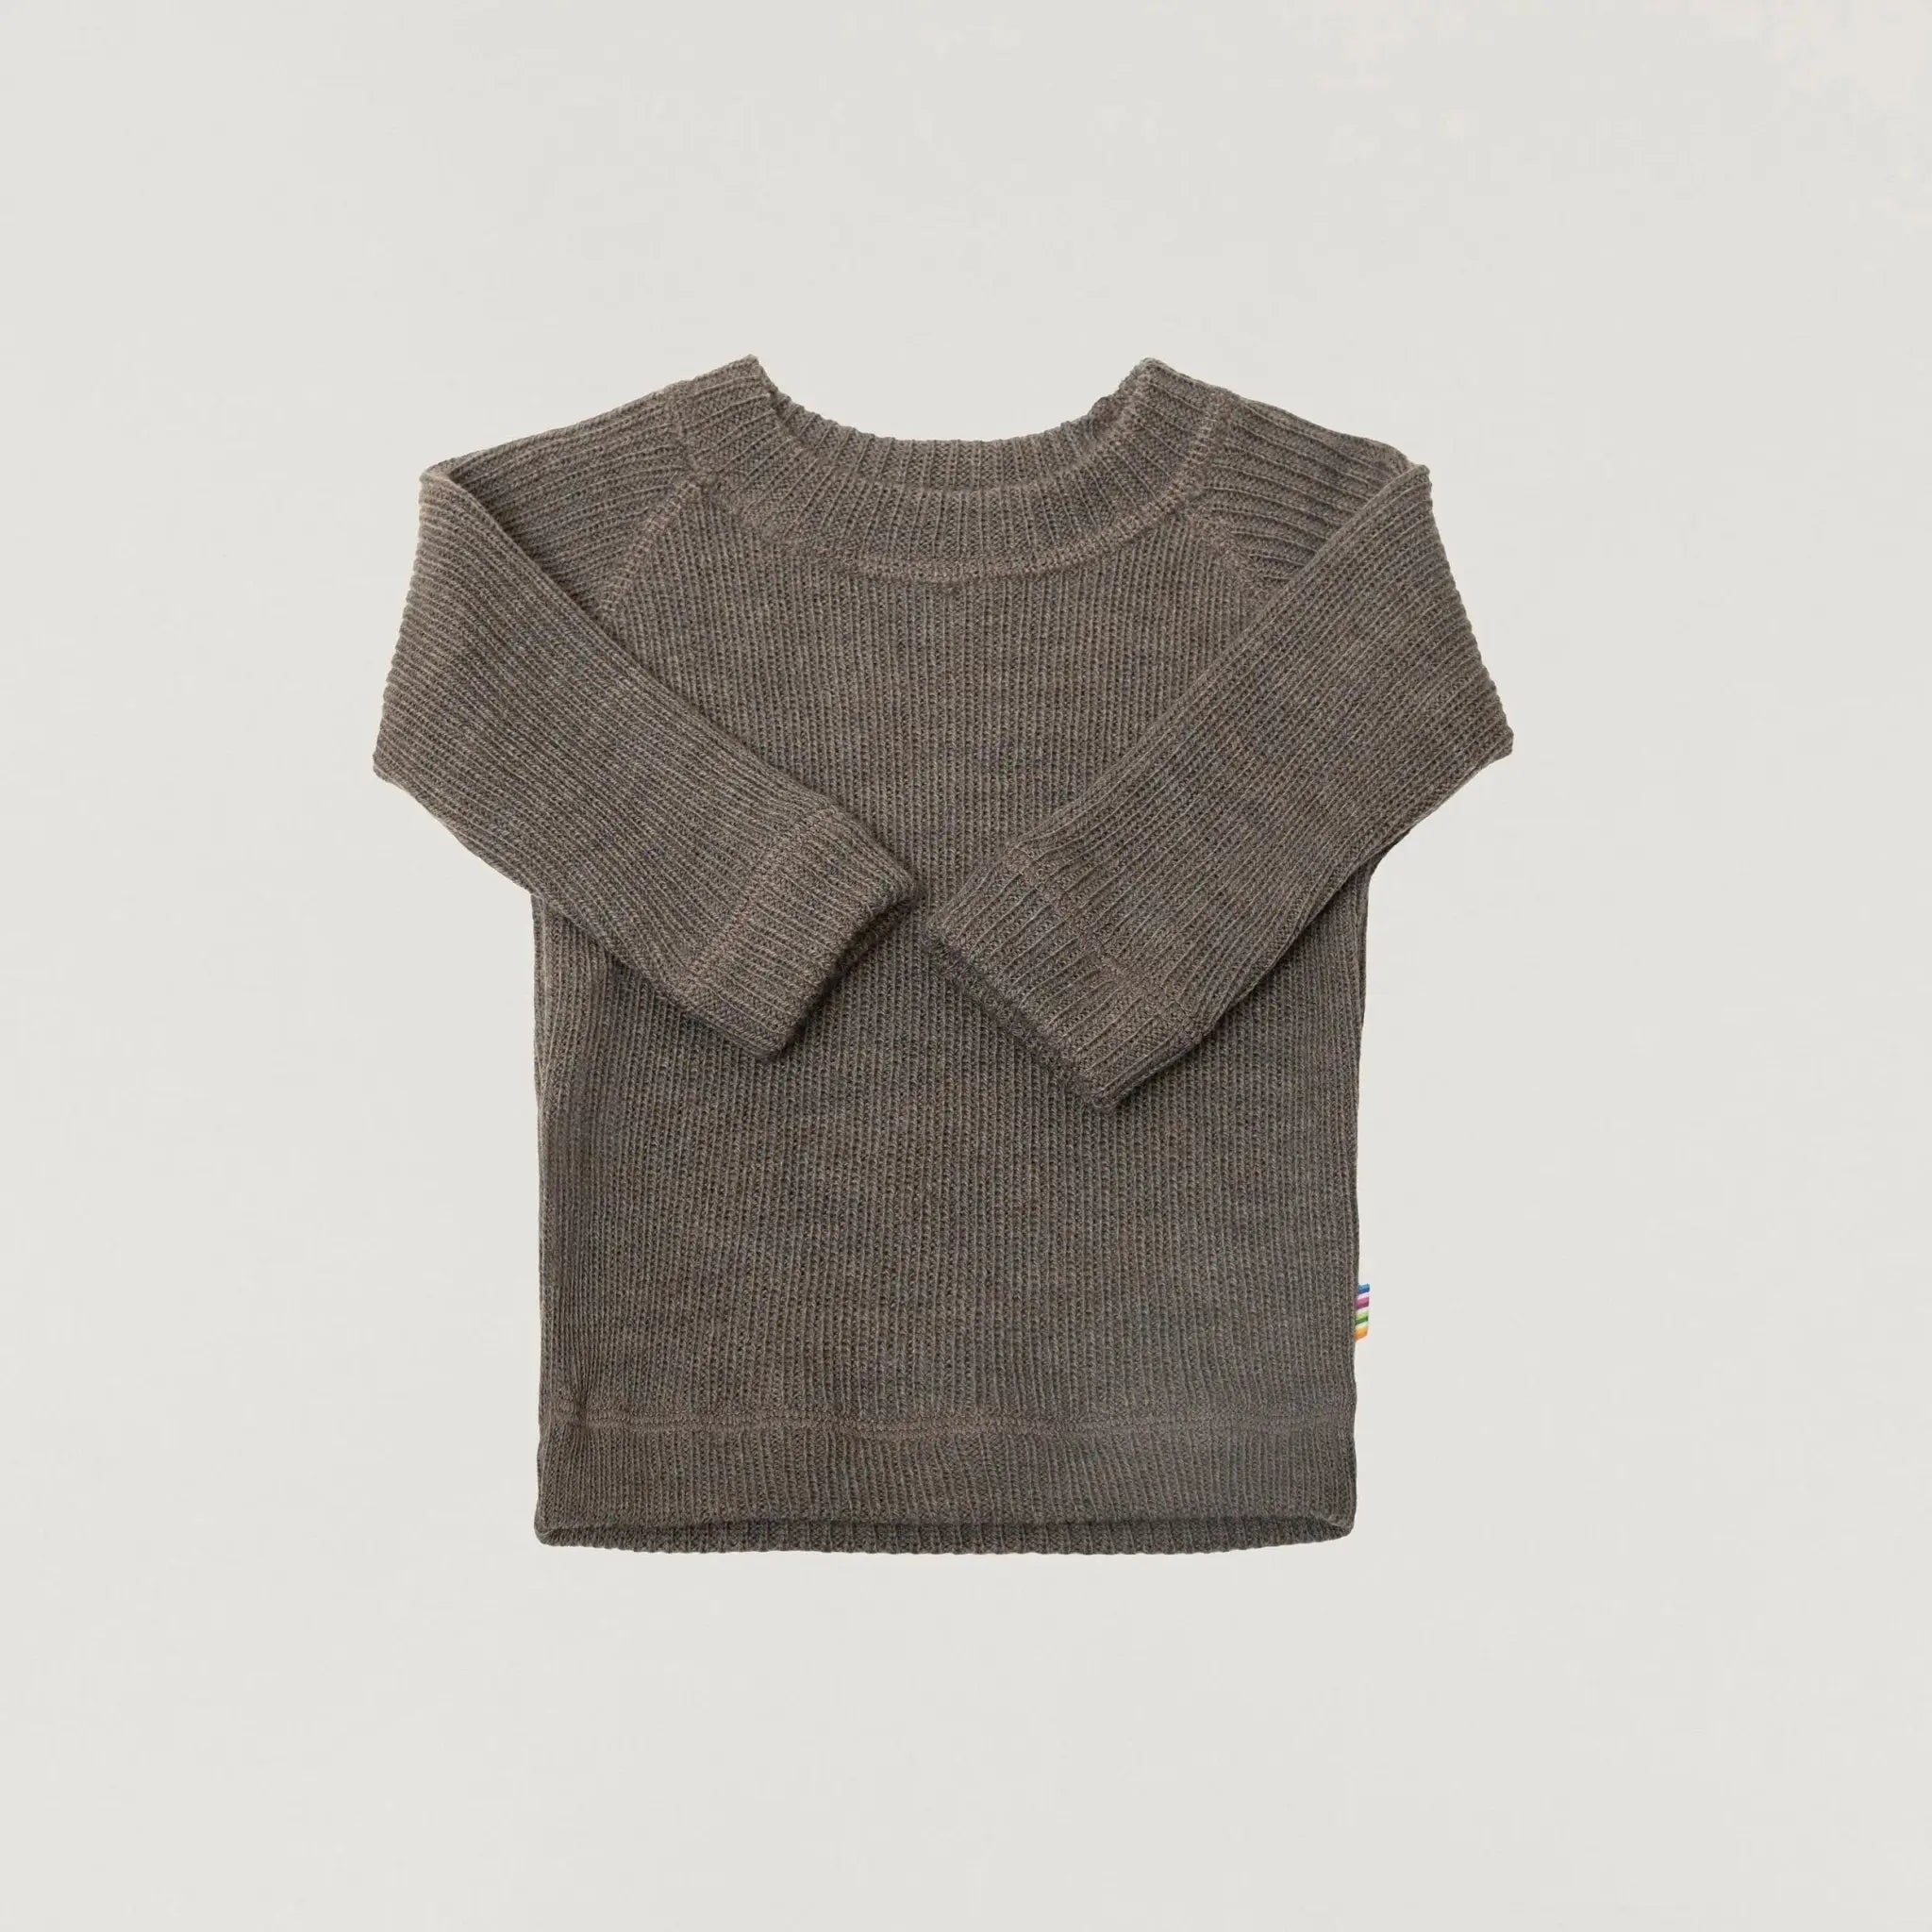 Babybox and Family Joha Rippstrickpullover aus Wolle 56/62 grey-brown-melange-jh #farbe_56/62